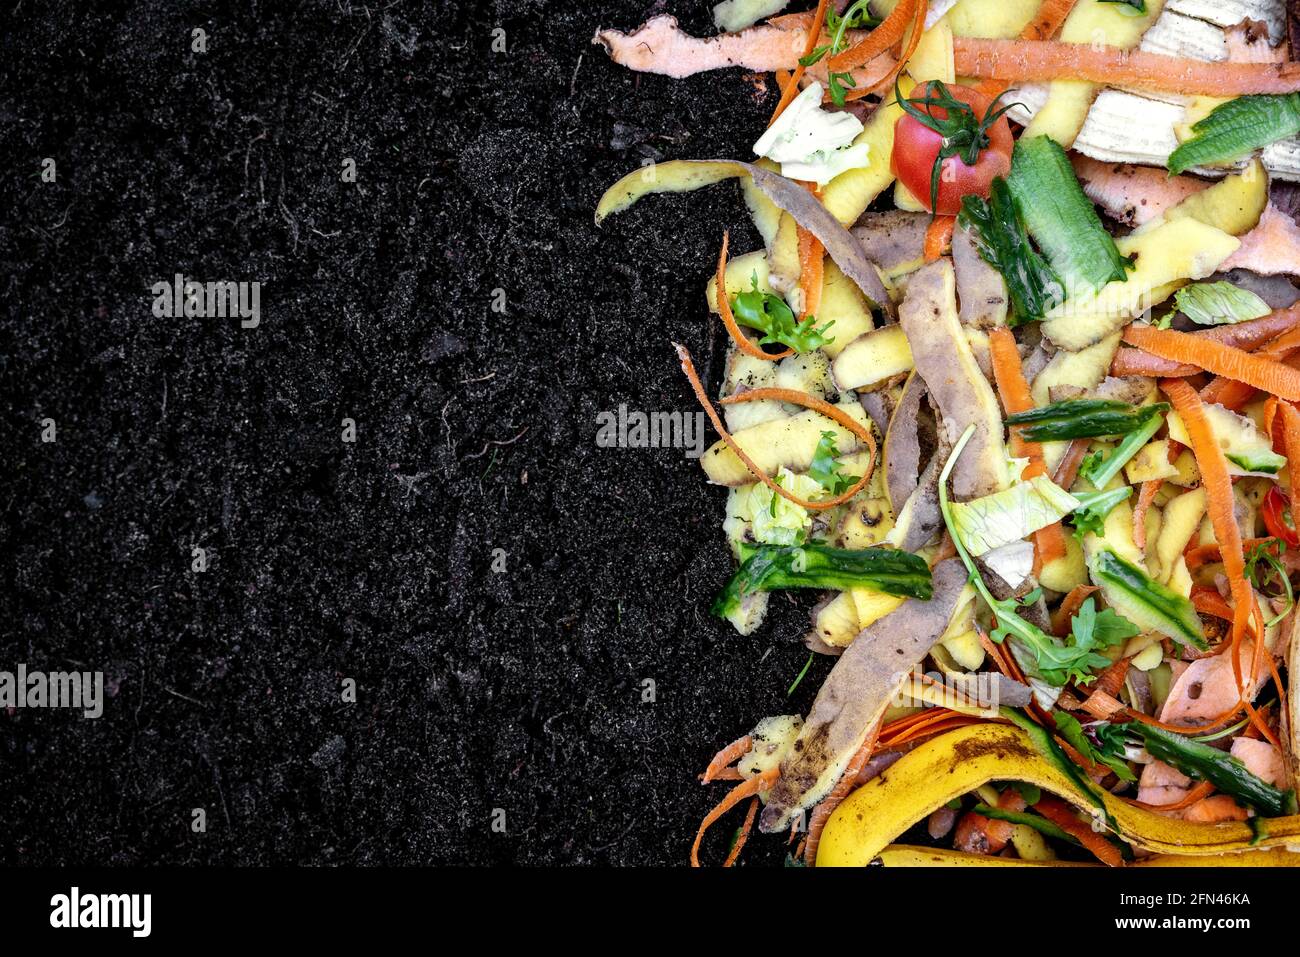 biodegradable kitchen waste on soil. composting organic food leftovers. copy space Stock Photo